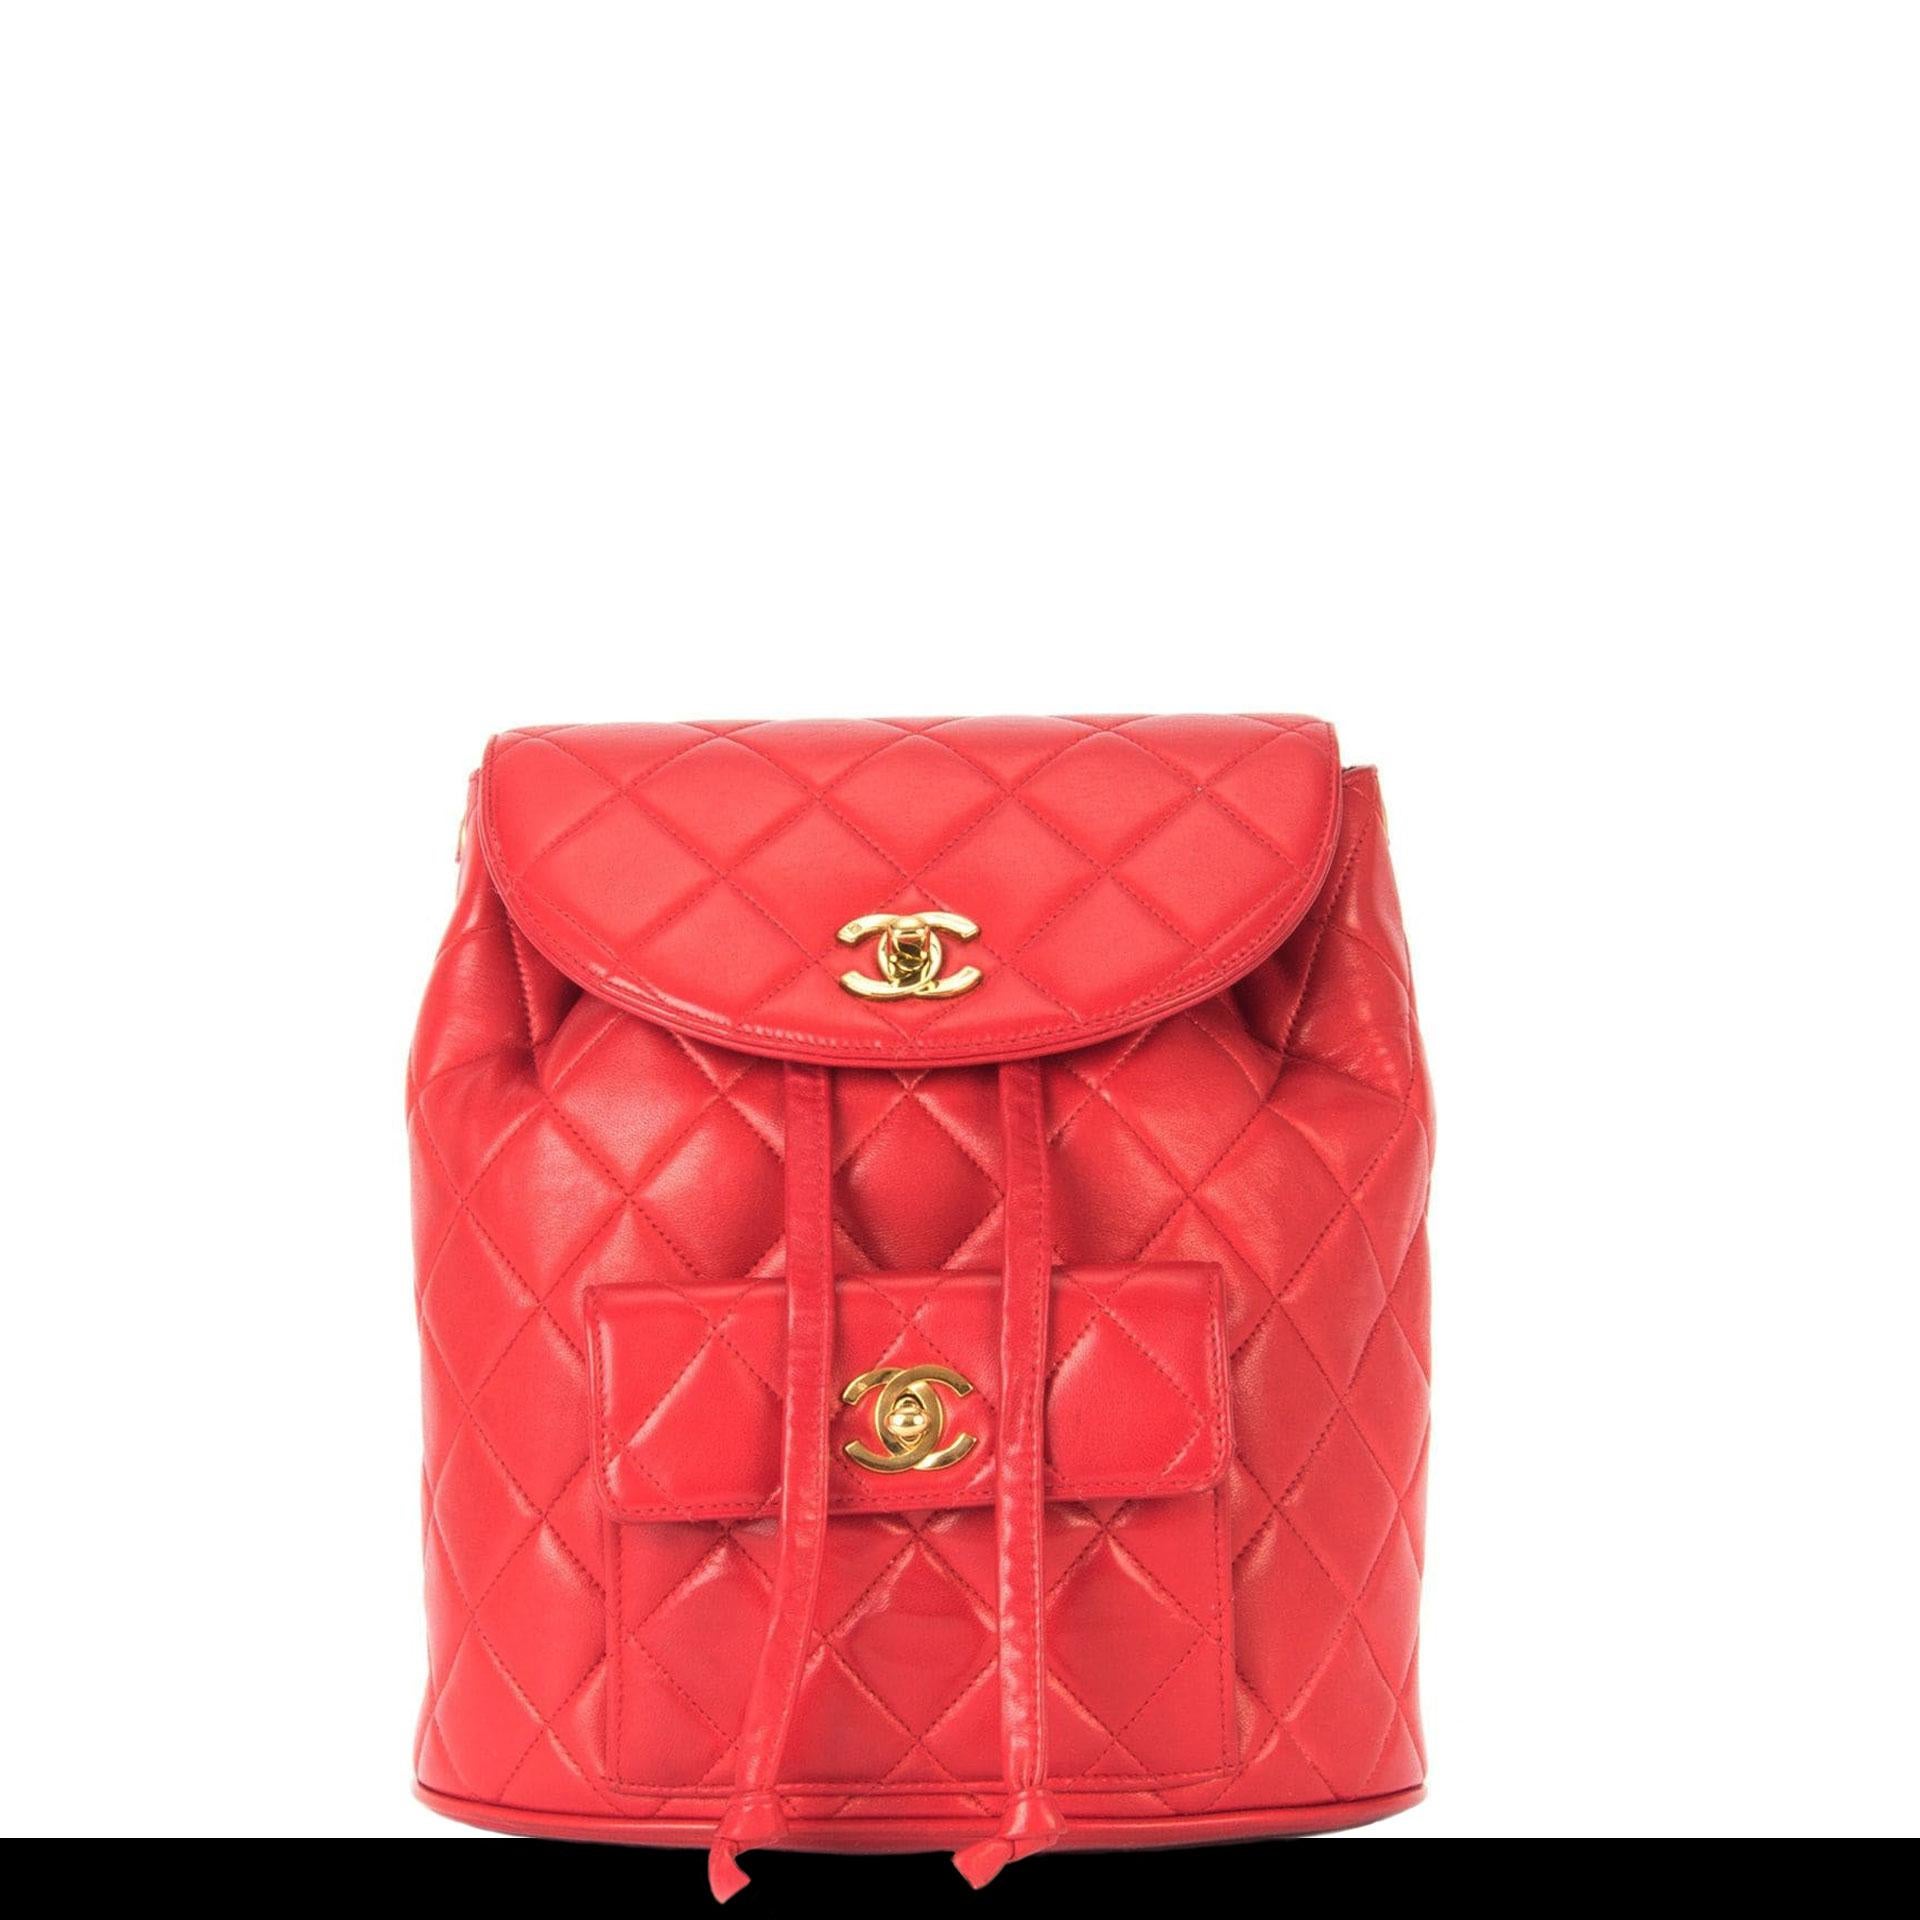 Chanel 1994 Backpack Ultra Rare Duma Vintage Red Lambskin Leather Backpack For Sale 2